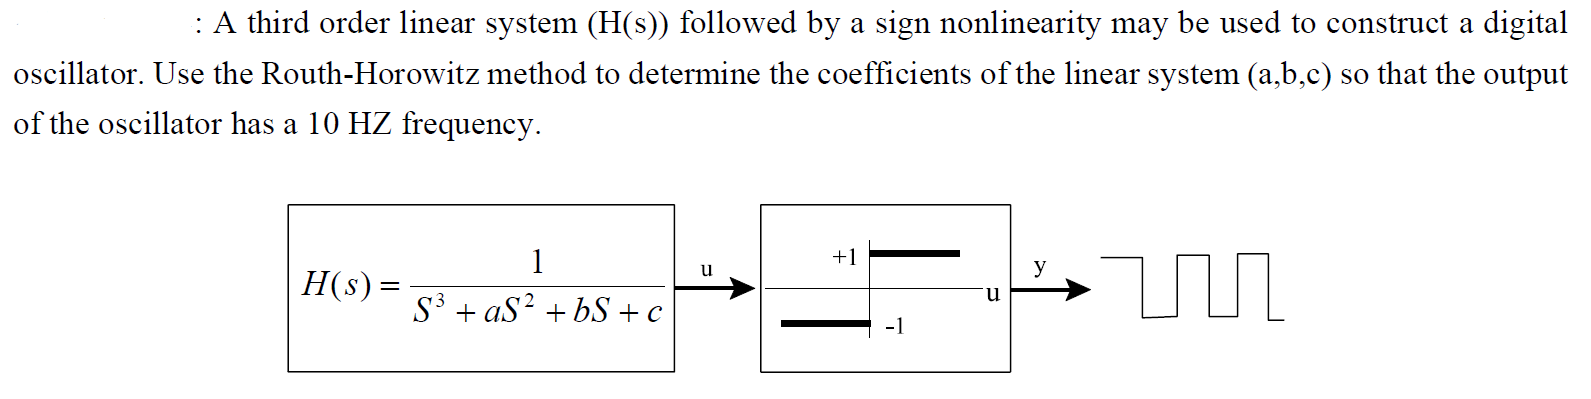 A third order linear system (H(s)) followed by a s